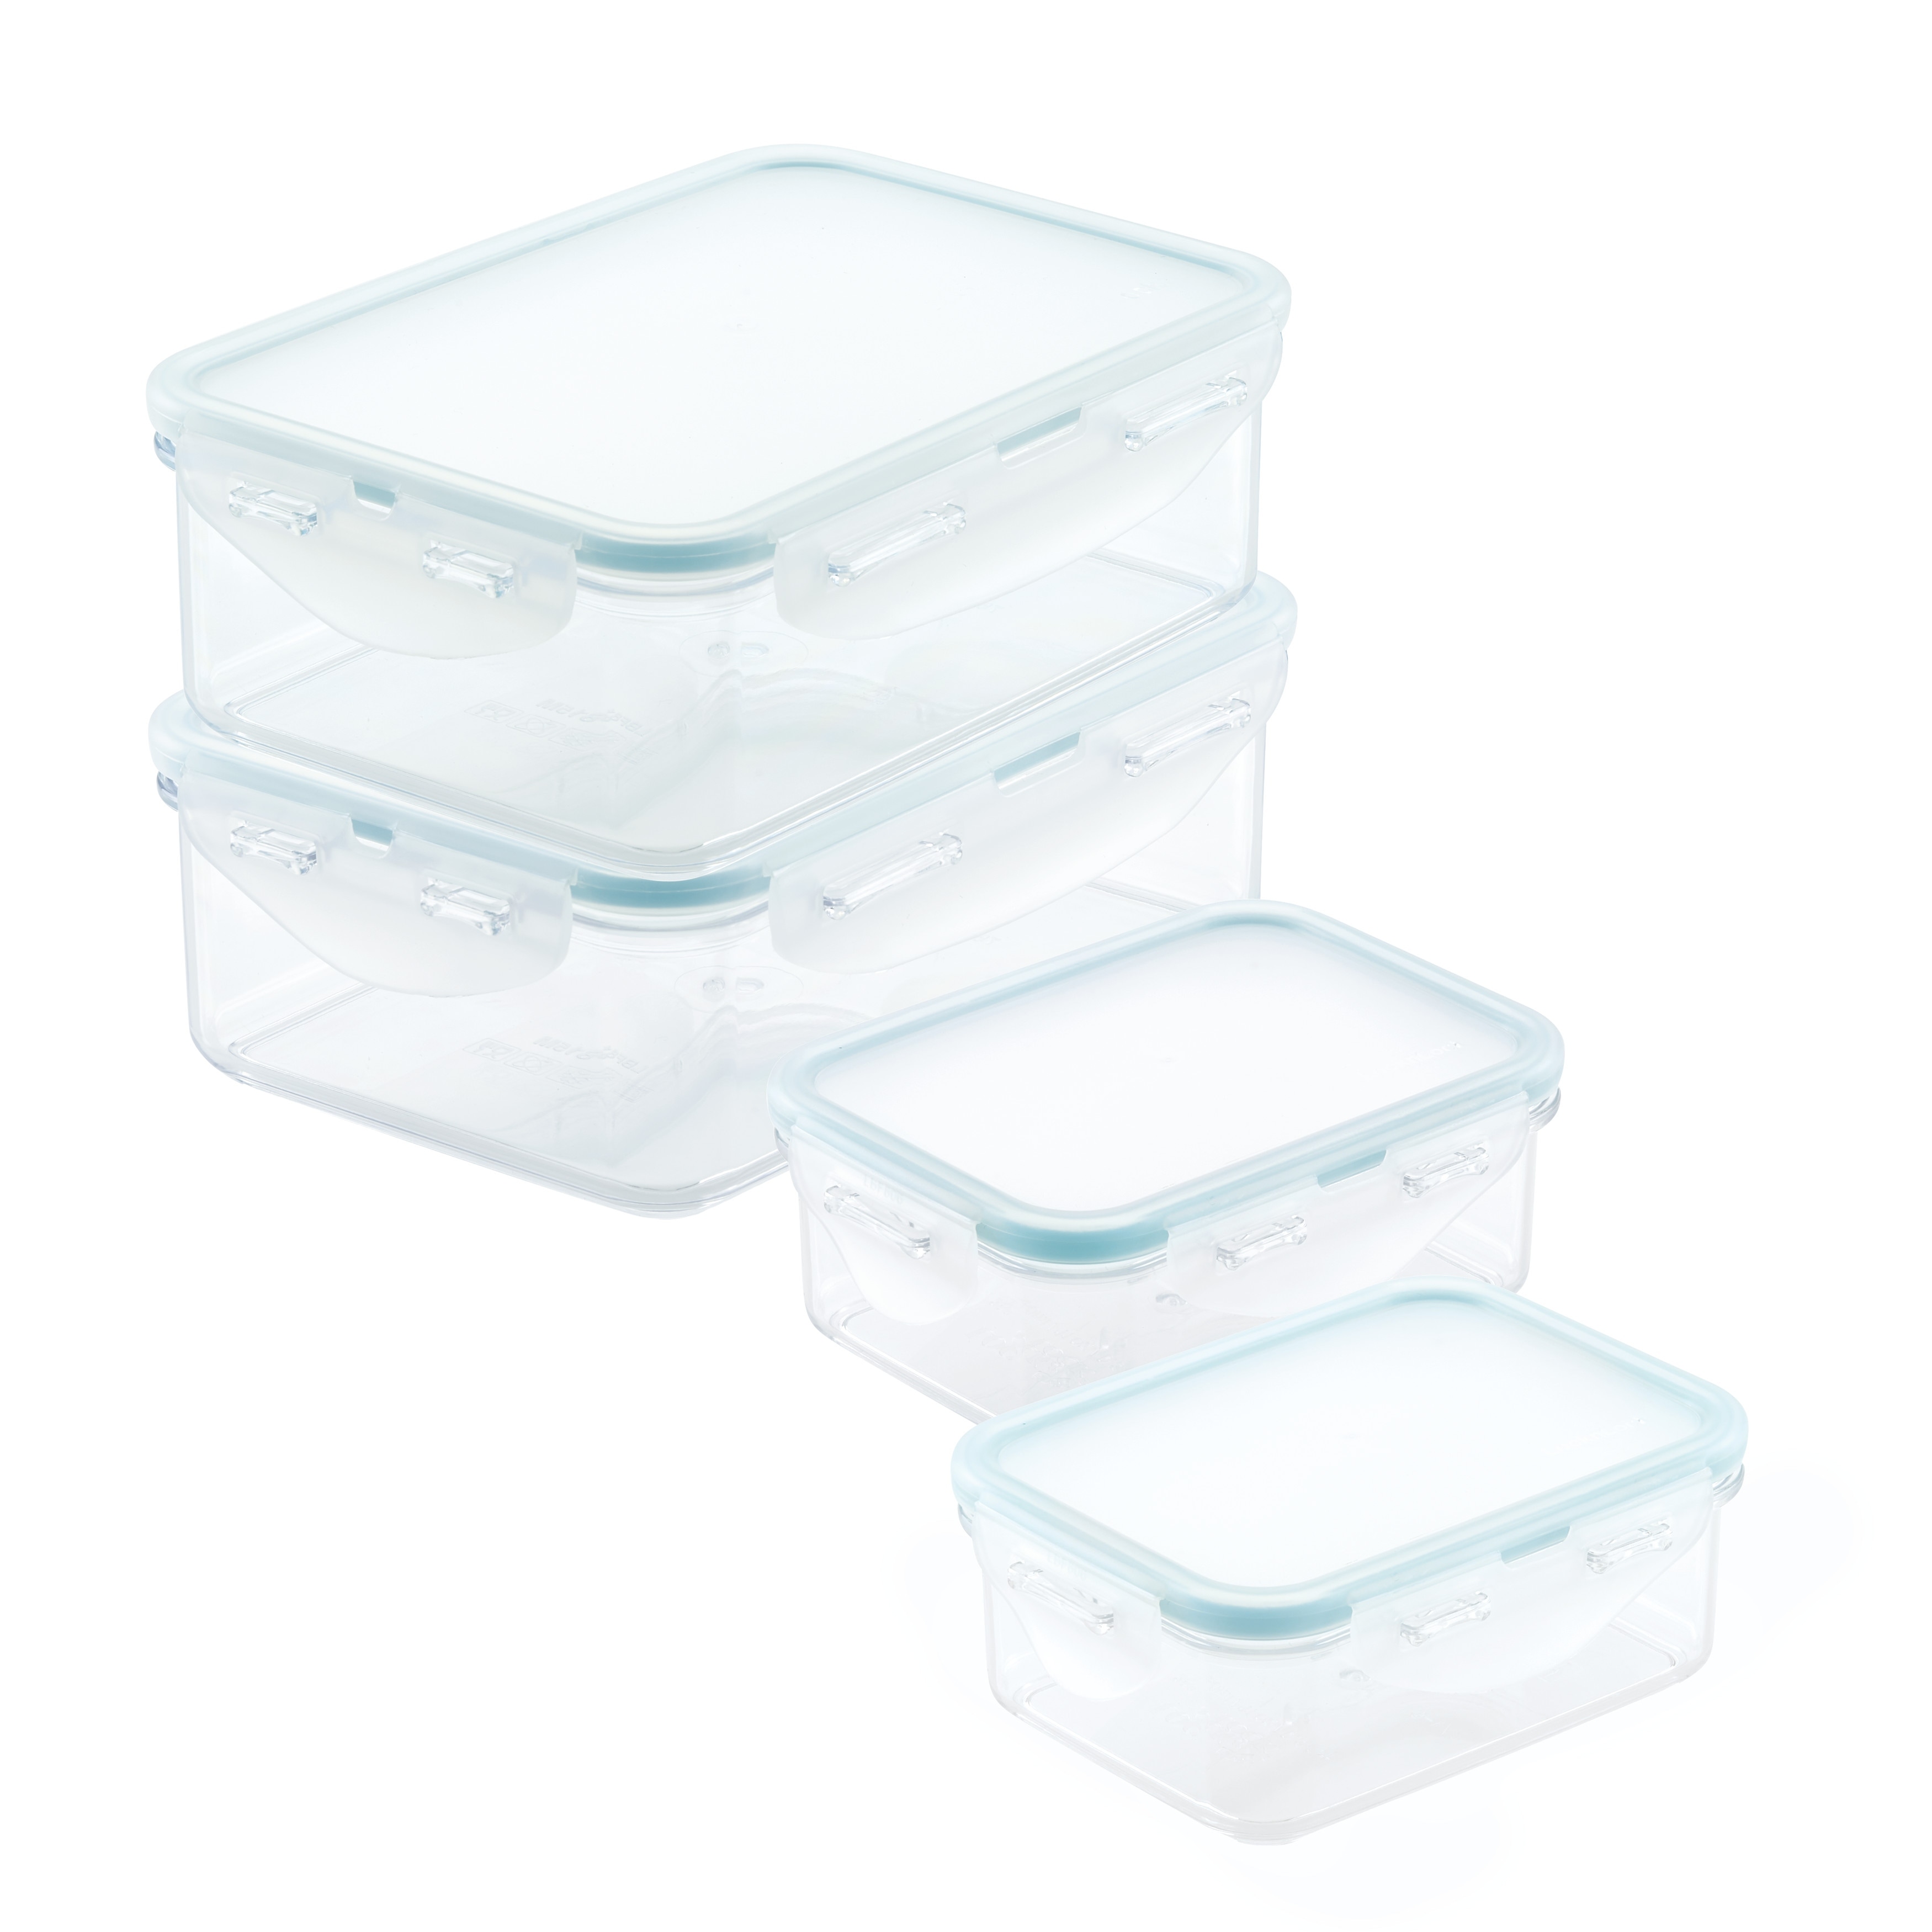 https://ak1.ostkcdn.com/images/products/is/images/direct/eac9658d05880bd9ce927b7ff53aea4c88887ae6/LocknLock-Purely-Better-Rectangular-Food-Storage-Container-Set%2C-4-Piece.jpg